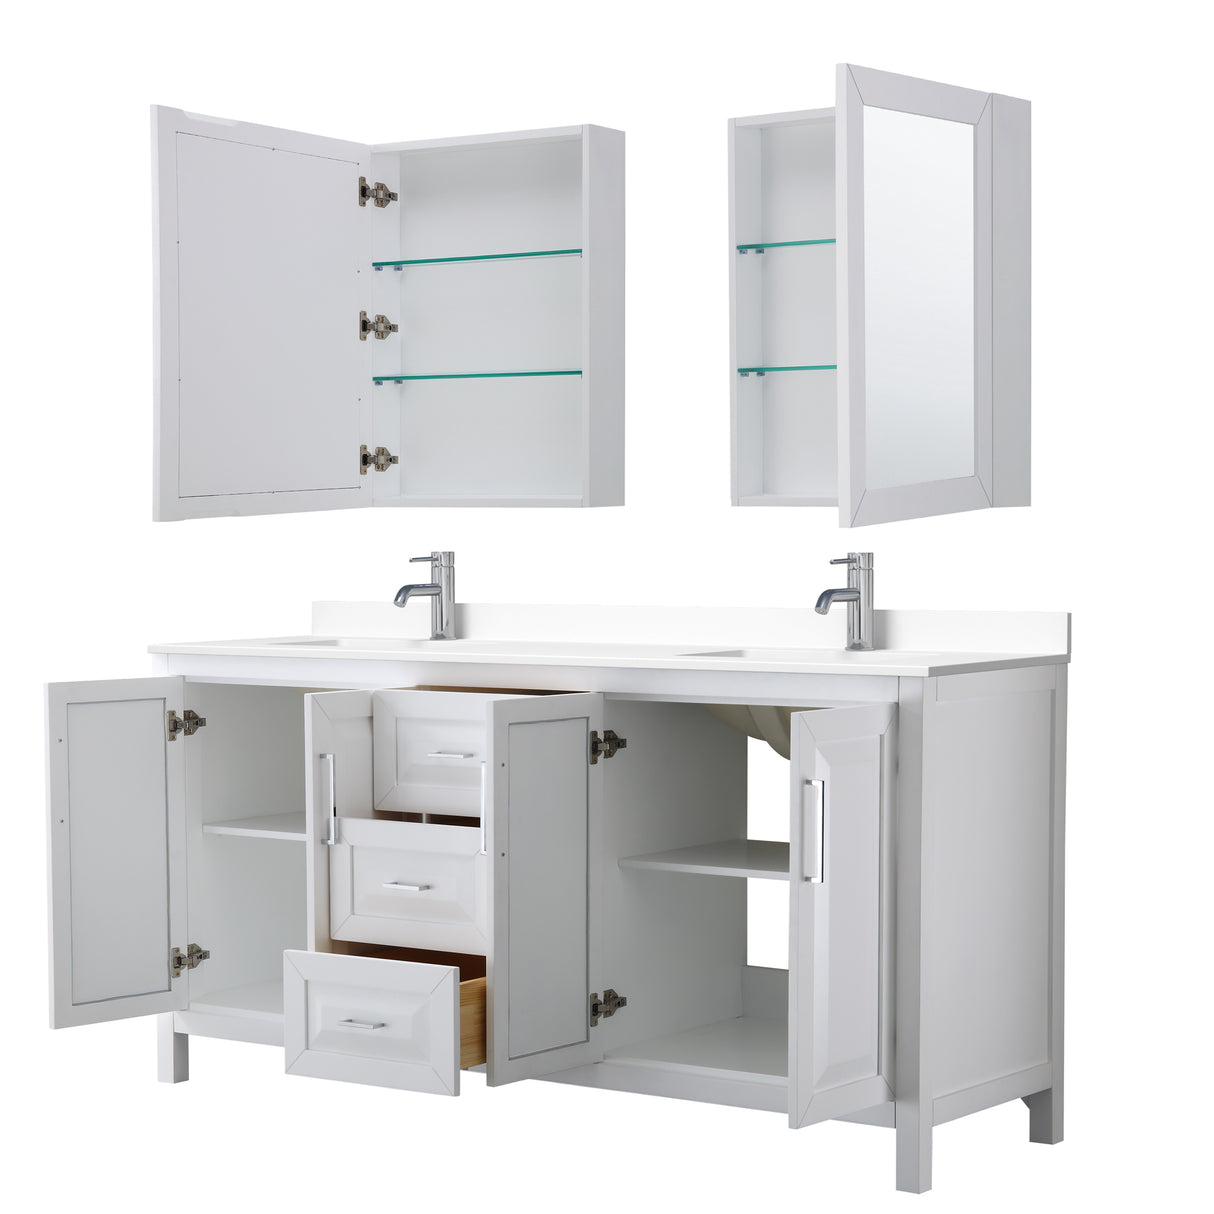 Daria 72 Inch Double Bathroom Vanity in White White Cultured Marble Countertop Undermount Square Sinks Medicine Cabinets